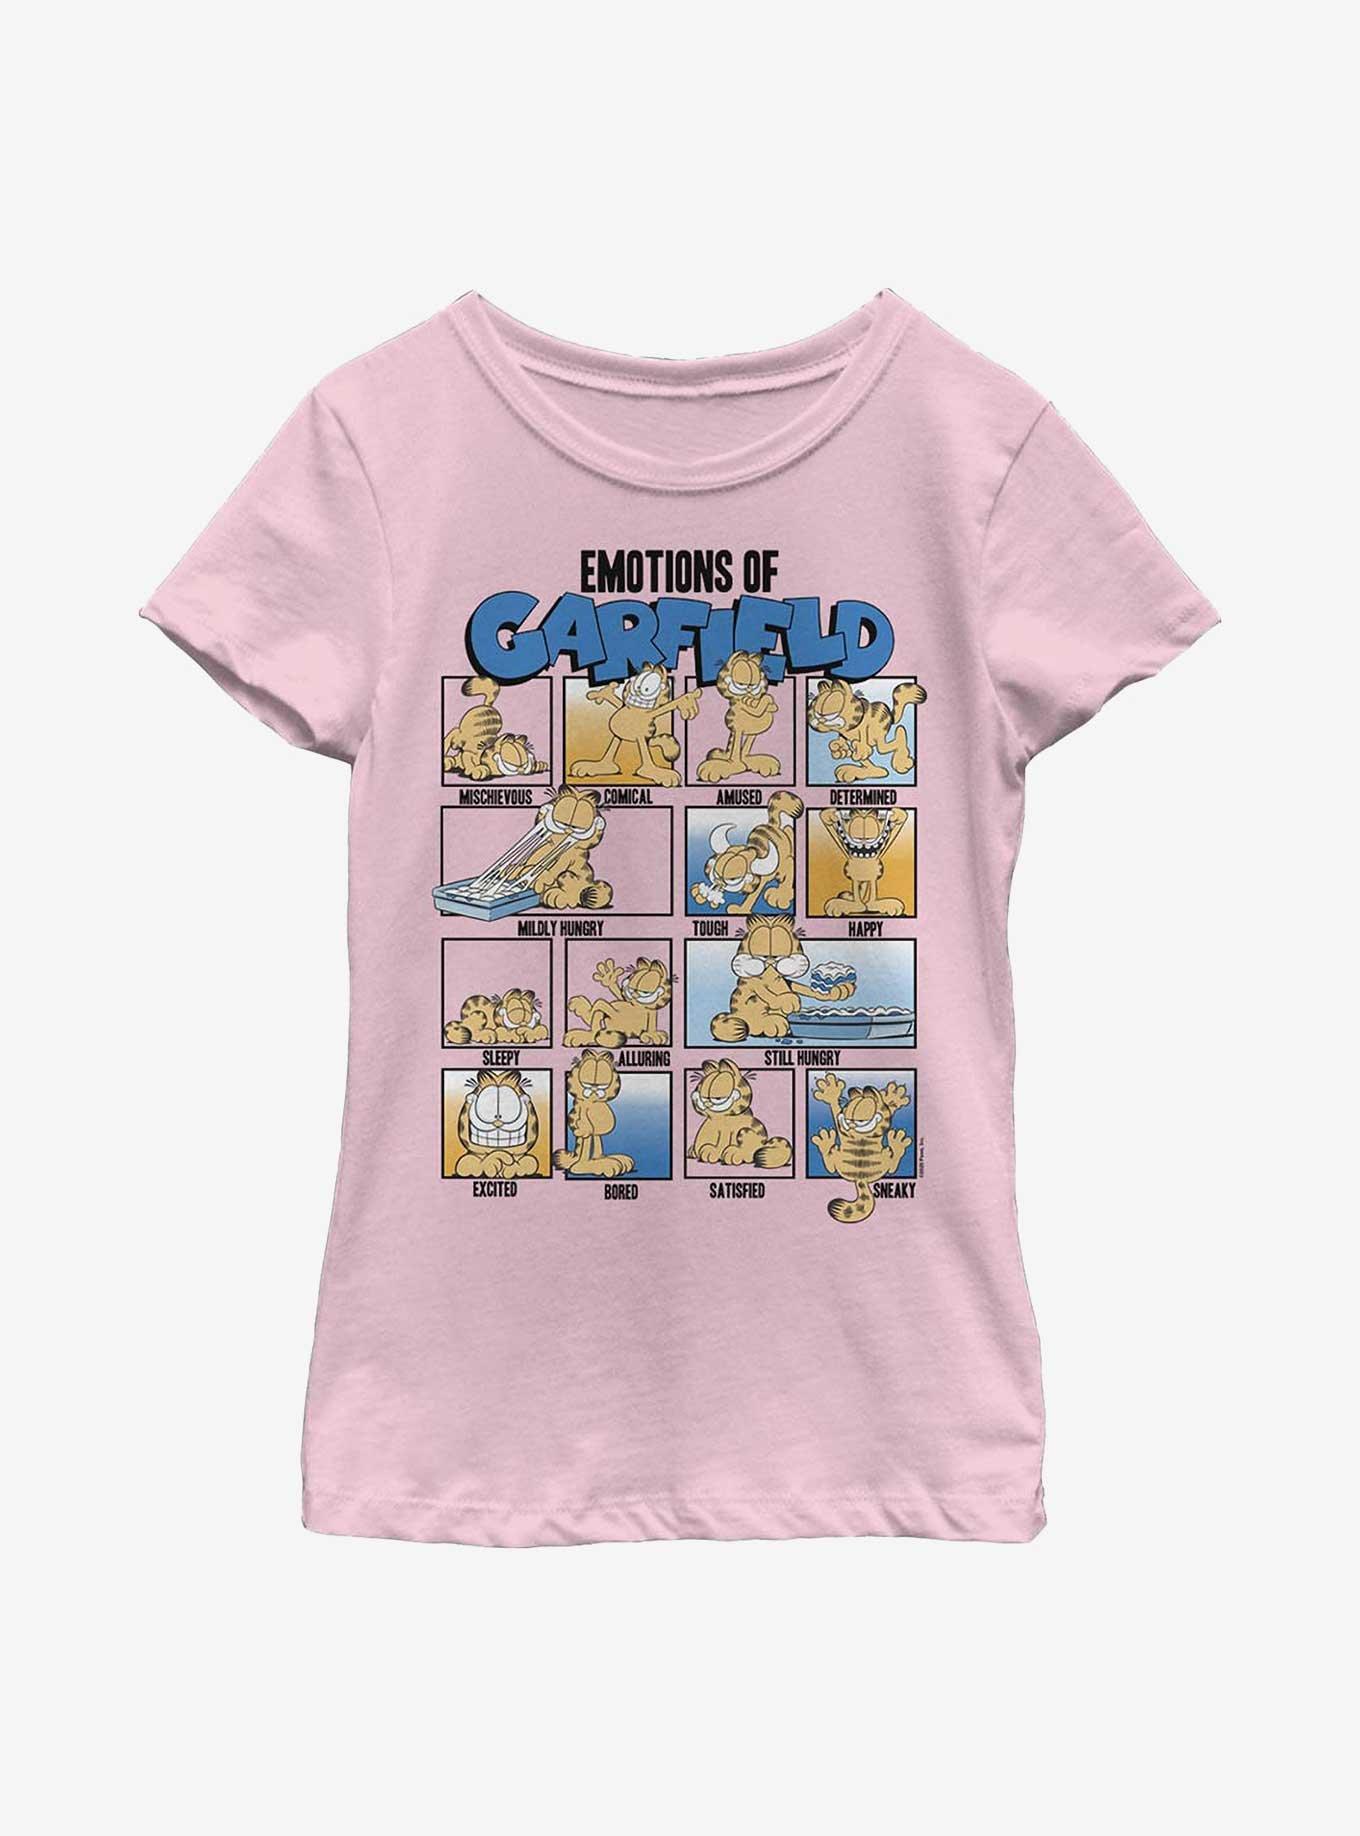 Garfield Emotions Of Garfield Youth Girl's T-Shirt, PINK, hi-res